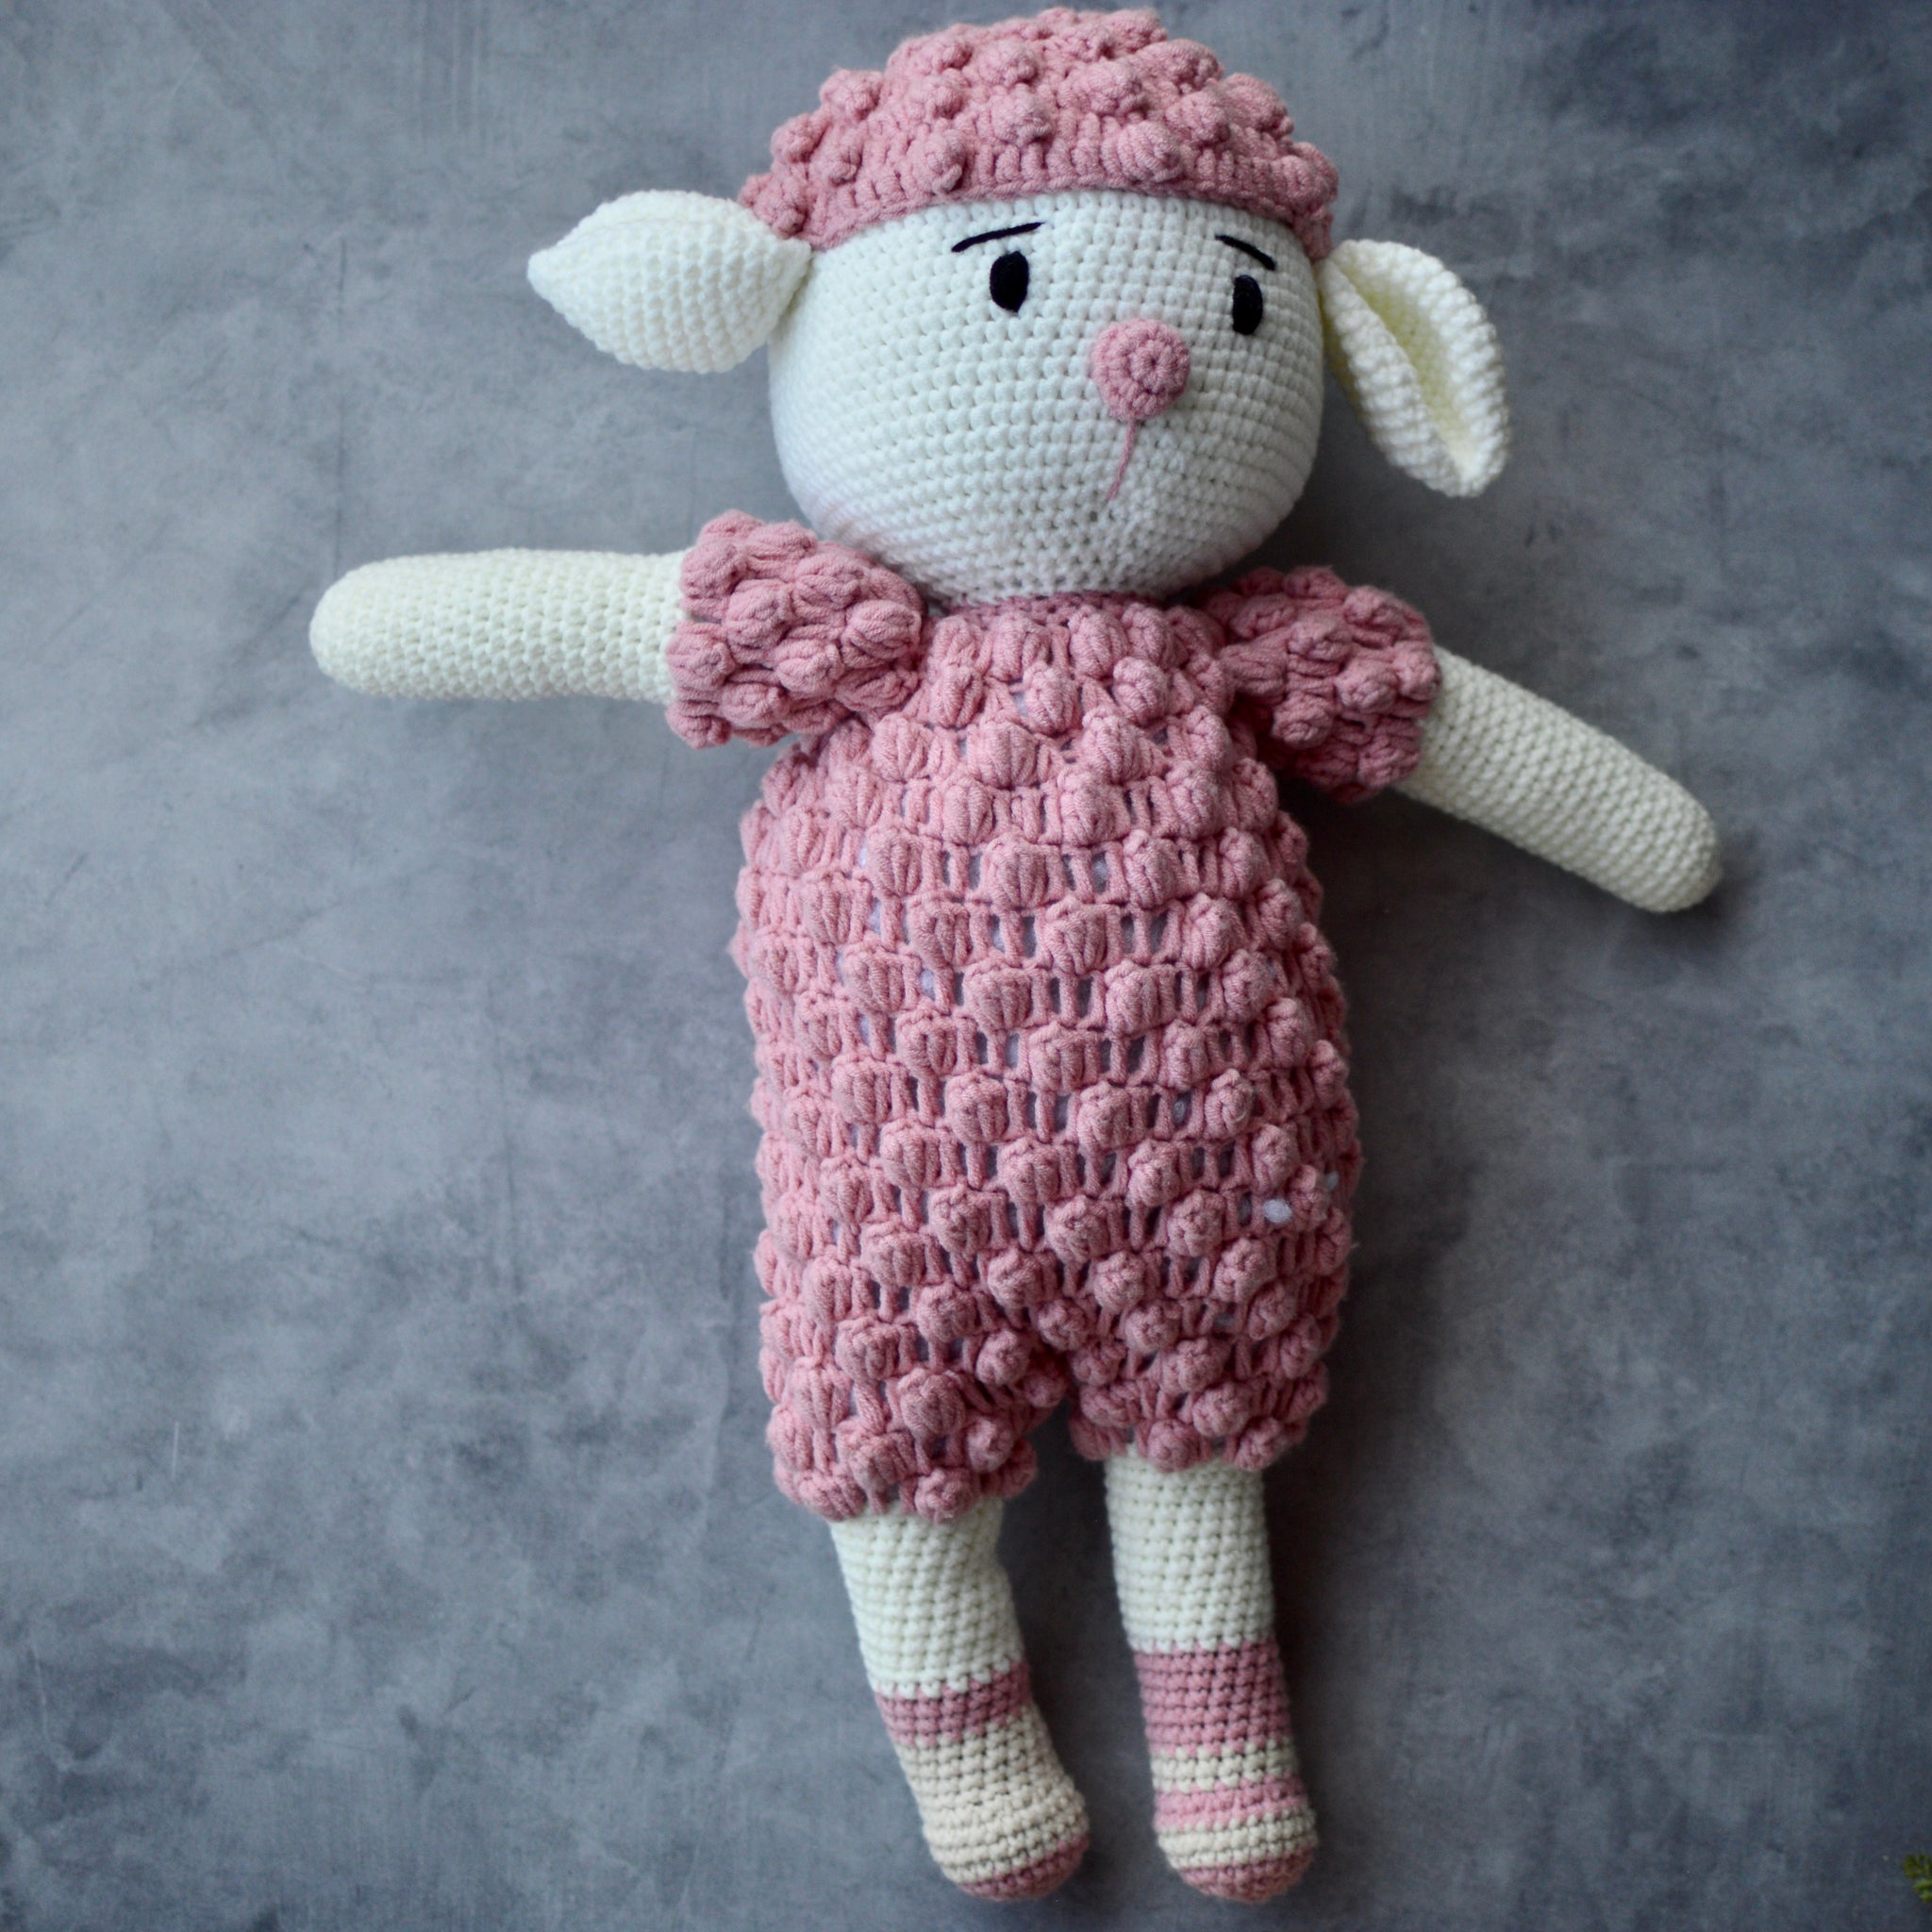 Handmade crochet doll, Made to order custom crochet dolls, handmade dolls, hand crochet doll baby princess toy unique gift safe toy stuffed amigurumi, personalized gift, birthday, weeding gift, anniversary gift, custom gift pink dolly bear dog princess bride groom 